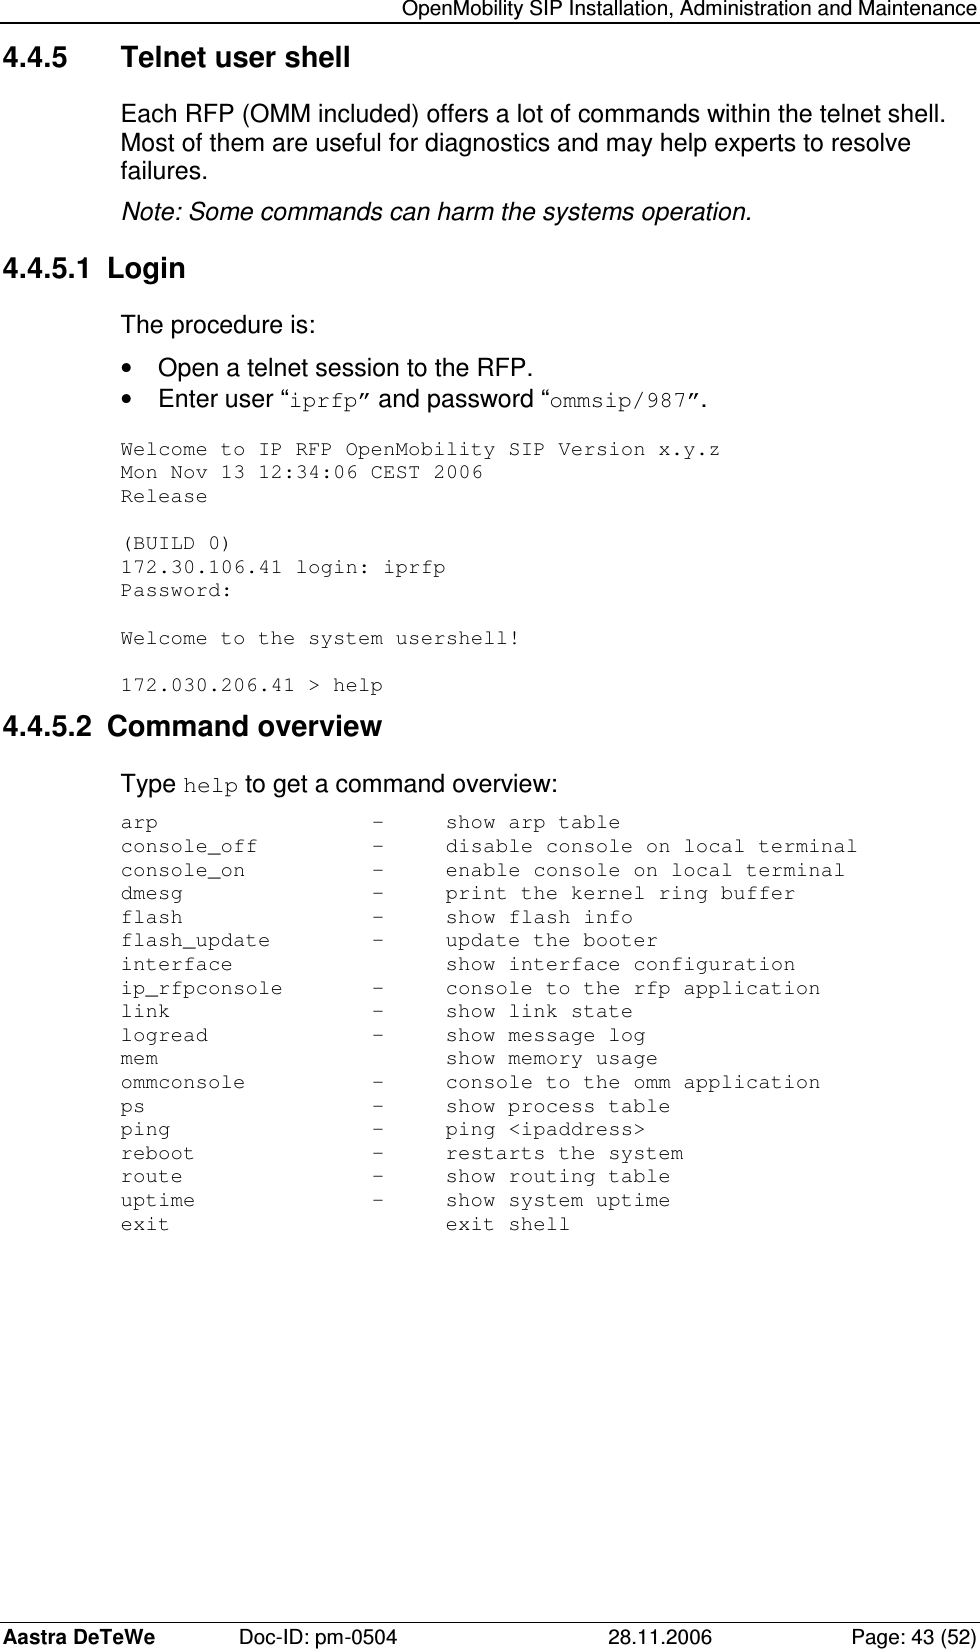   OpenMobility SIP Installation, Administration and Maintenance Aastra DeTeWe  Doc-ID: pm-0504  28.11.2006  Page: 43 (52) 4.4.5  Telnet user shell Each RFP (OMM included) offers a lot of commands within the telnet shell. Most of them are useful for diagnostics and may help experts to resolve failures. Note: Some commands can harm the systems operation. 4.4.5.1  Login The procedure is: •  Open a telnet session to the RFP. •  Enter user “iprfp” and password “ommsip/987”.  Welcome to IP RFP OpenMobility SIP Version x.y.z Mon Nov 13 12:34:06 CEST 2006 Release  (BUILD 0) 172.30.106.41 login: iprfp Password:  Welcome to the system usershell!  172.030.206.41 &gt; help 4.4.5.2  Command overview Type help to get a command overview: arp      -  show arp table console_off    -  disable console on local terminal console_on    -  enable console on local terminal dmesg      -  print the kernel ring buffer flash      -  show flash info flash_update    -  update the booter interface      show interface configuration ip_rfpconsole   -  console to the rfp application link      -  show link state logread      -  show message log mem        show memory usage ommconsole    -  console to the omm application ps       -  show process table ping      -  ping &lt;ipaddress&gt; reboot      -  restarts the system route      -  show routing table uptime      -  show system uptime exit        exit shell  